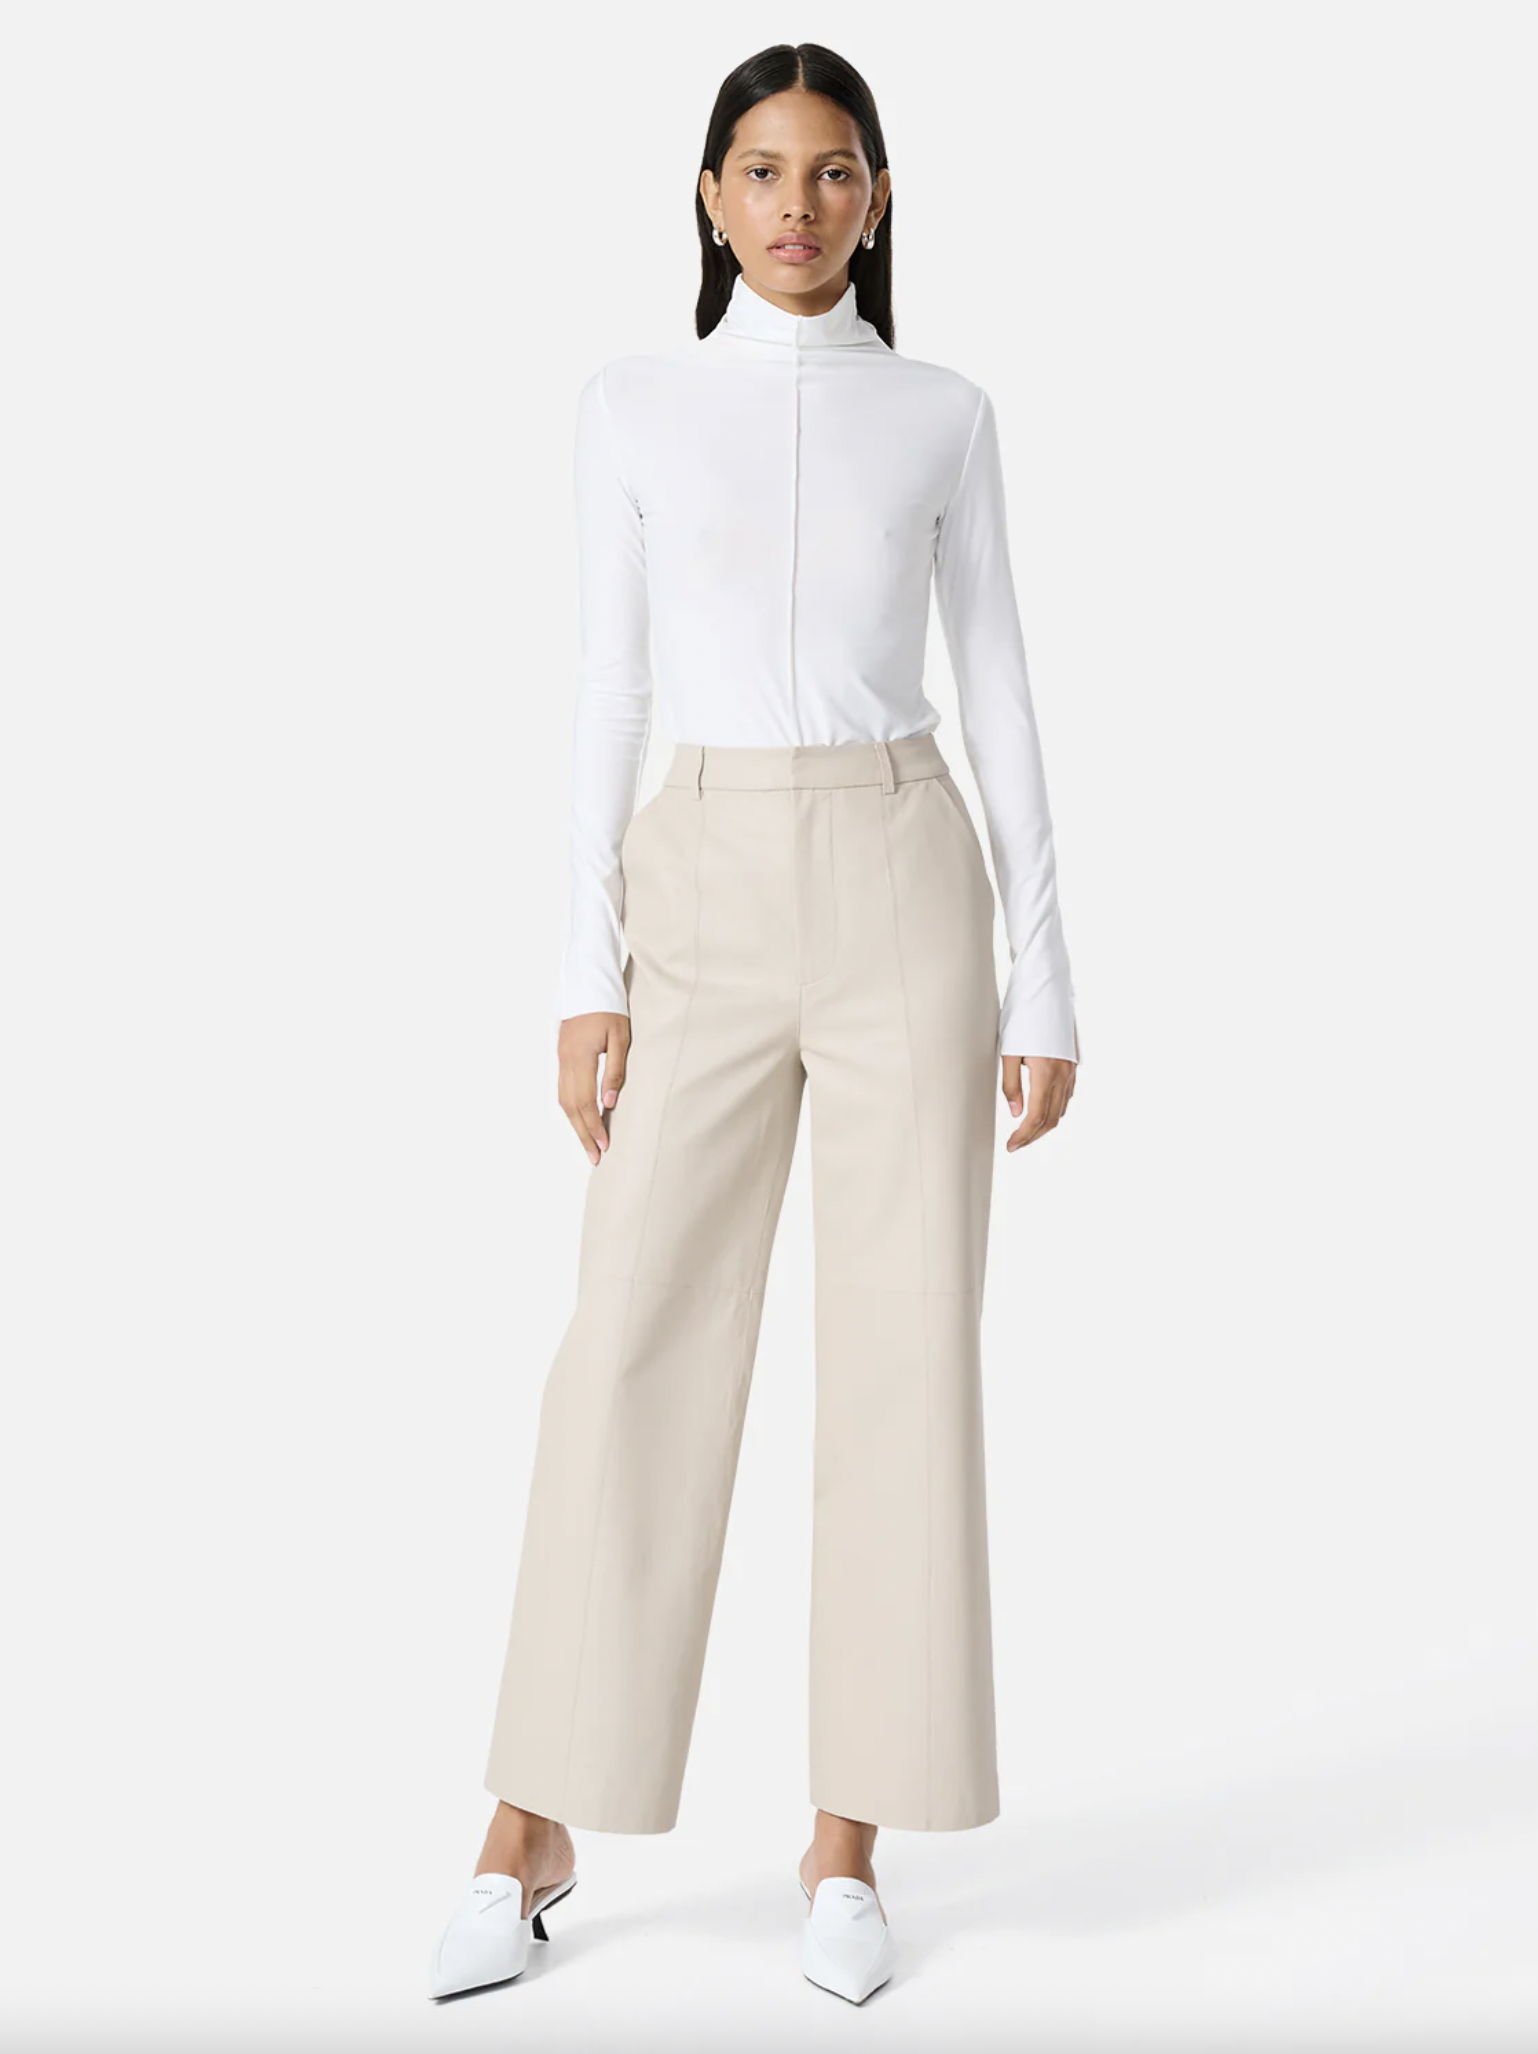 Ena Pelly - Stanford Leather Pant in Turtle Dove